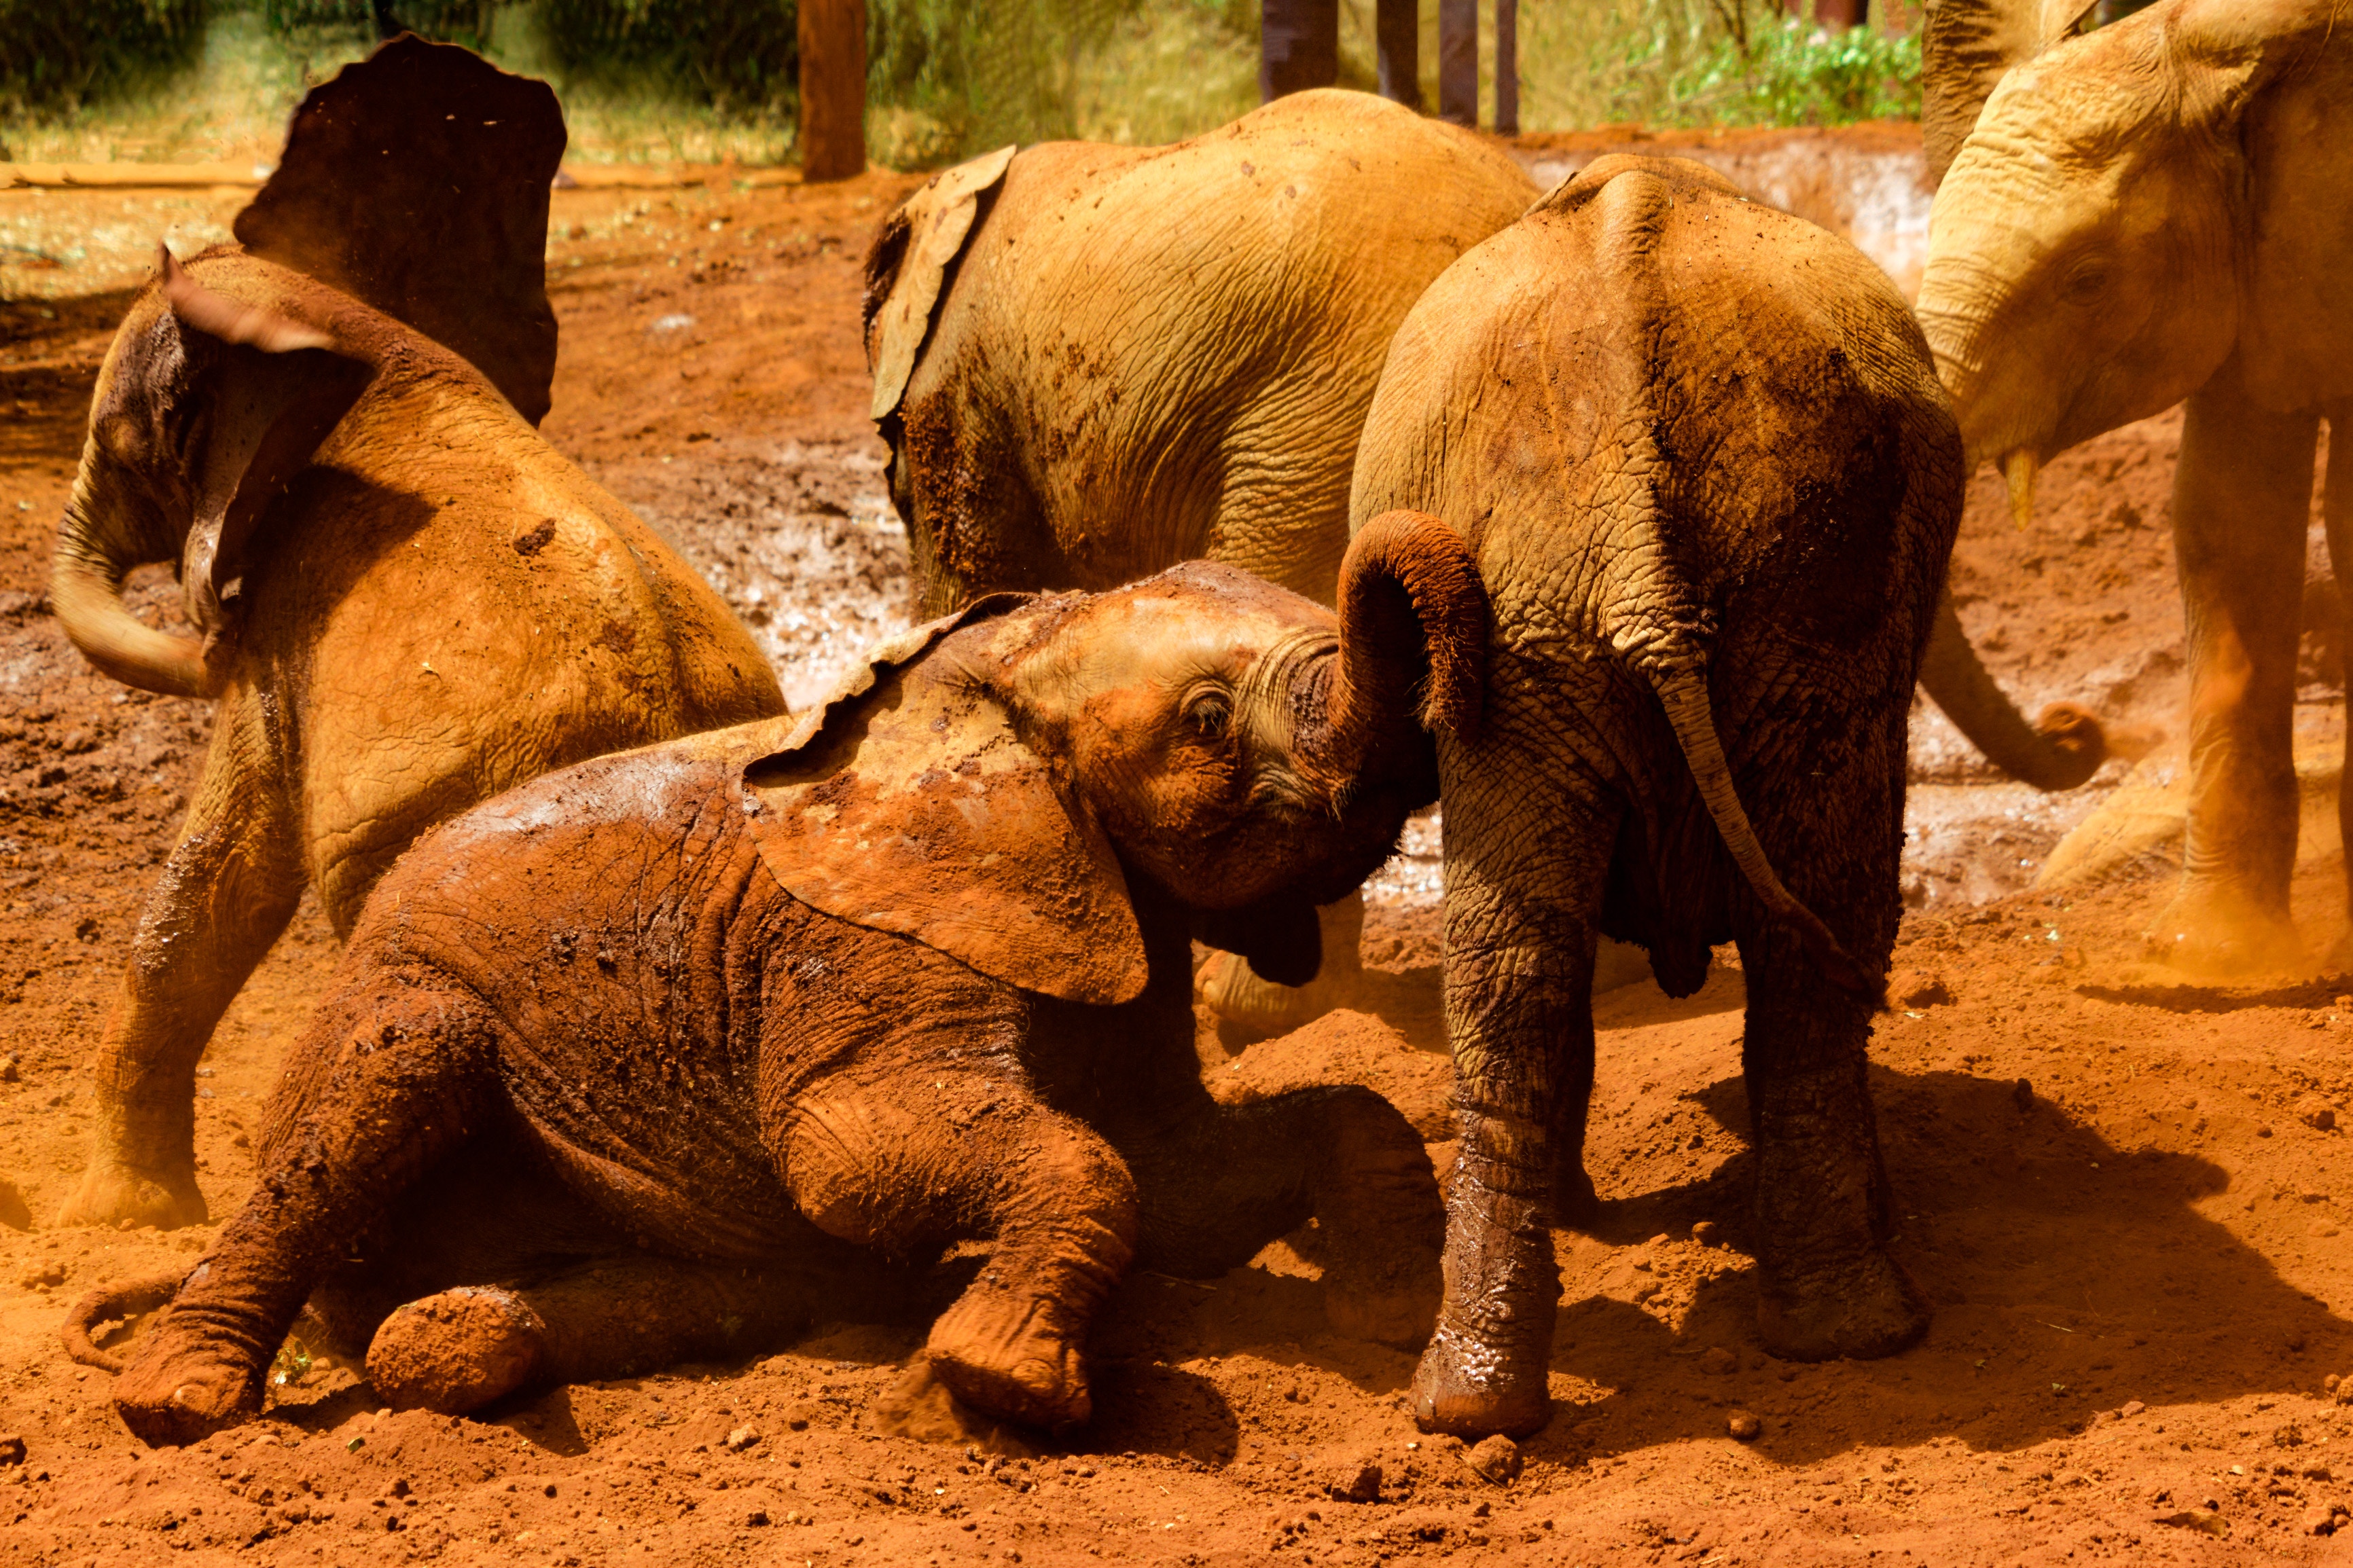 A group of baby elephants playing. Photo by Alex Mercado on Unsplash